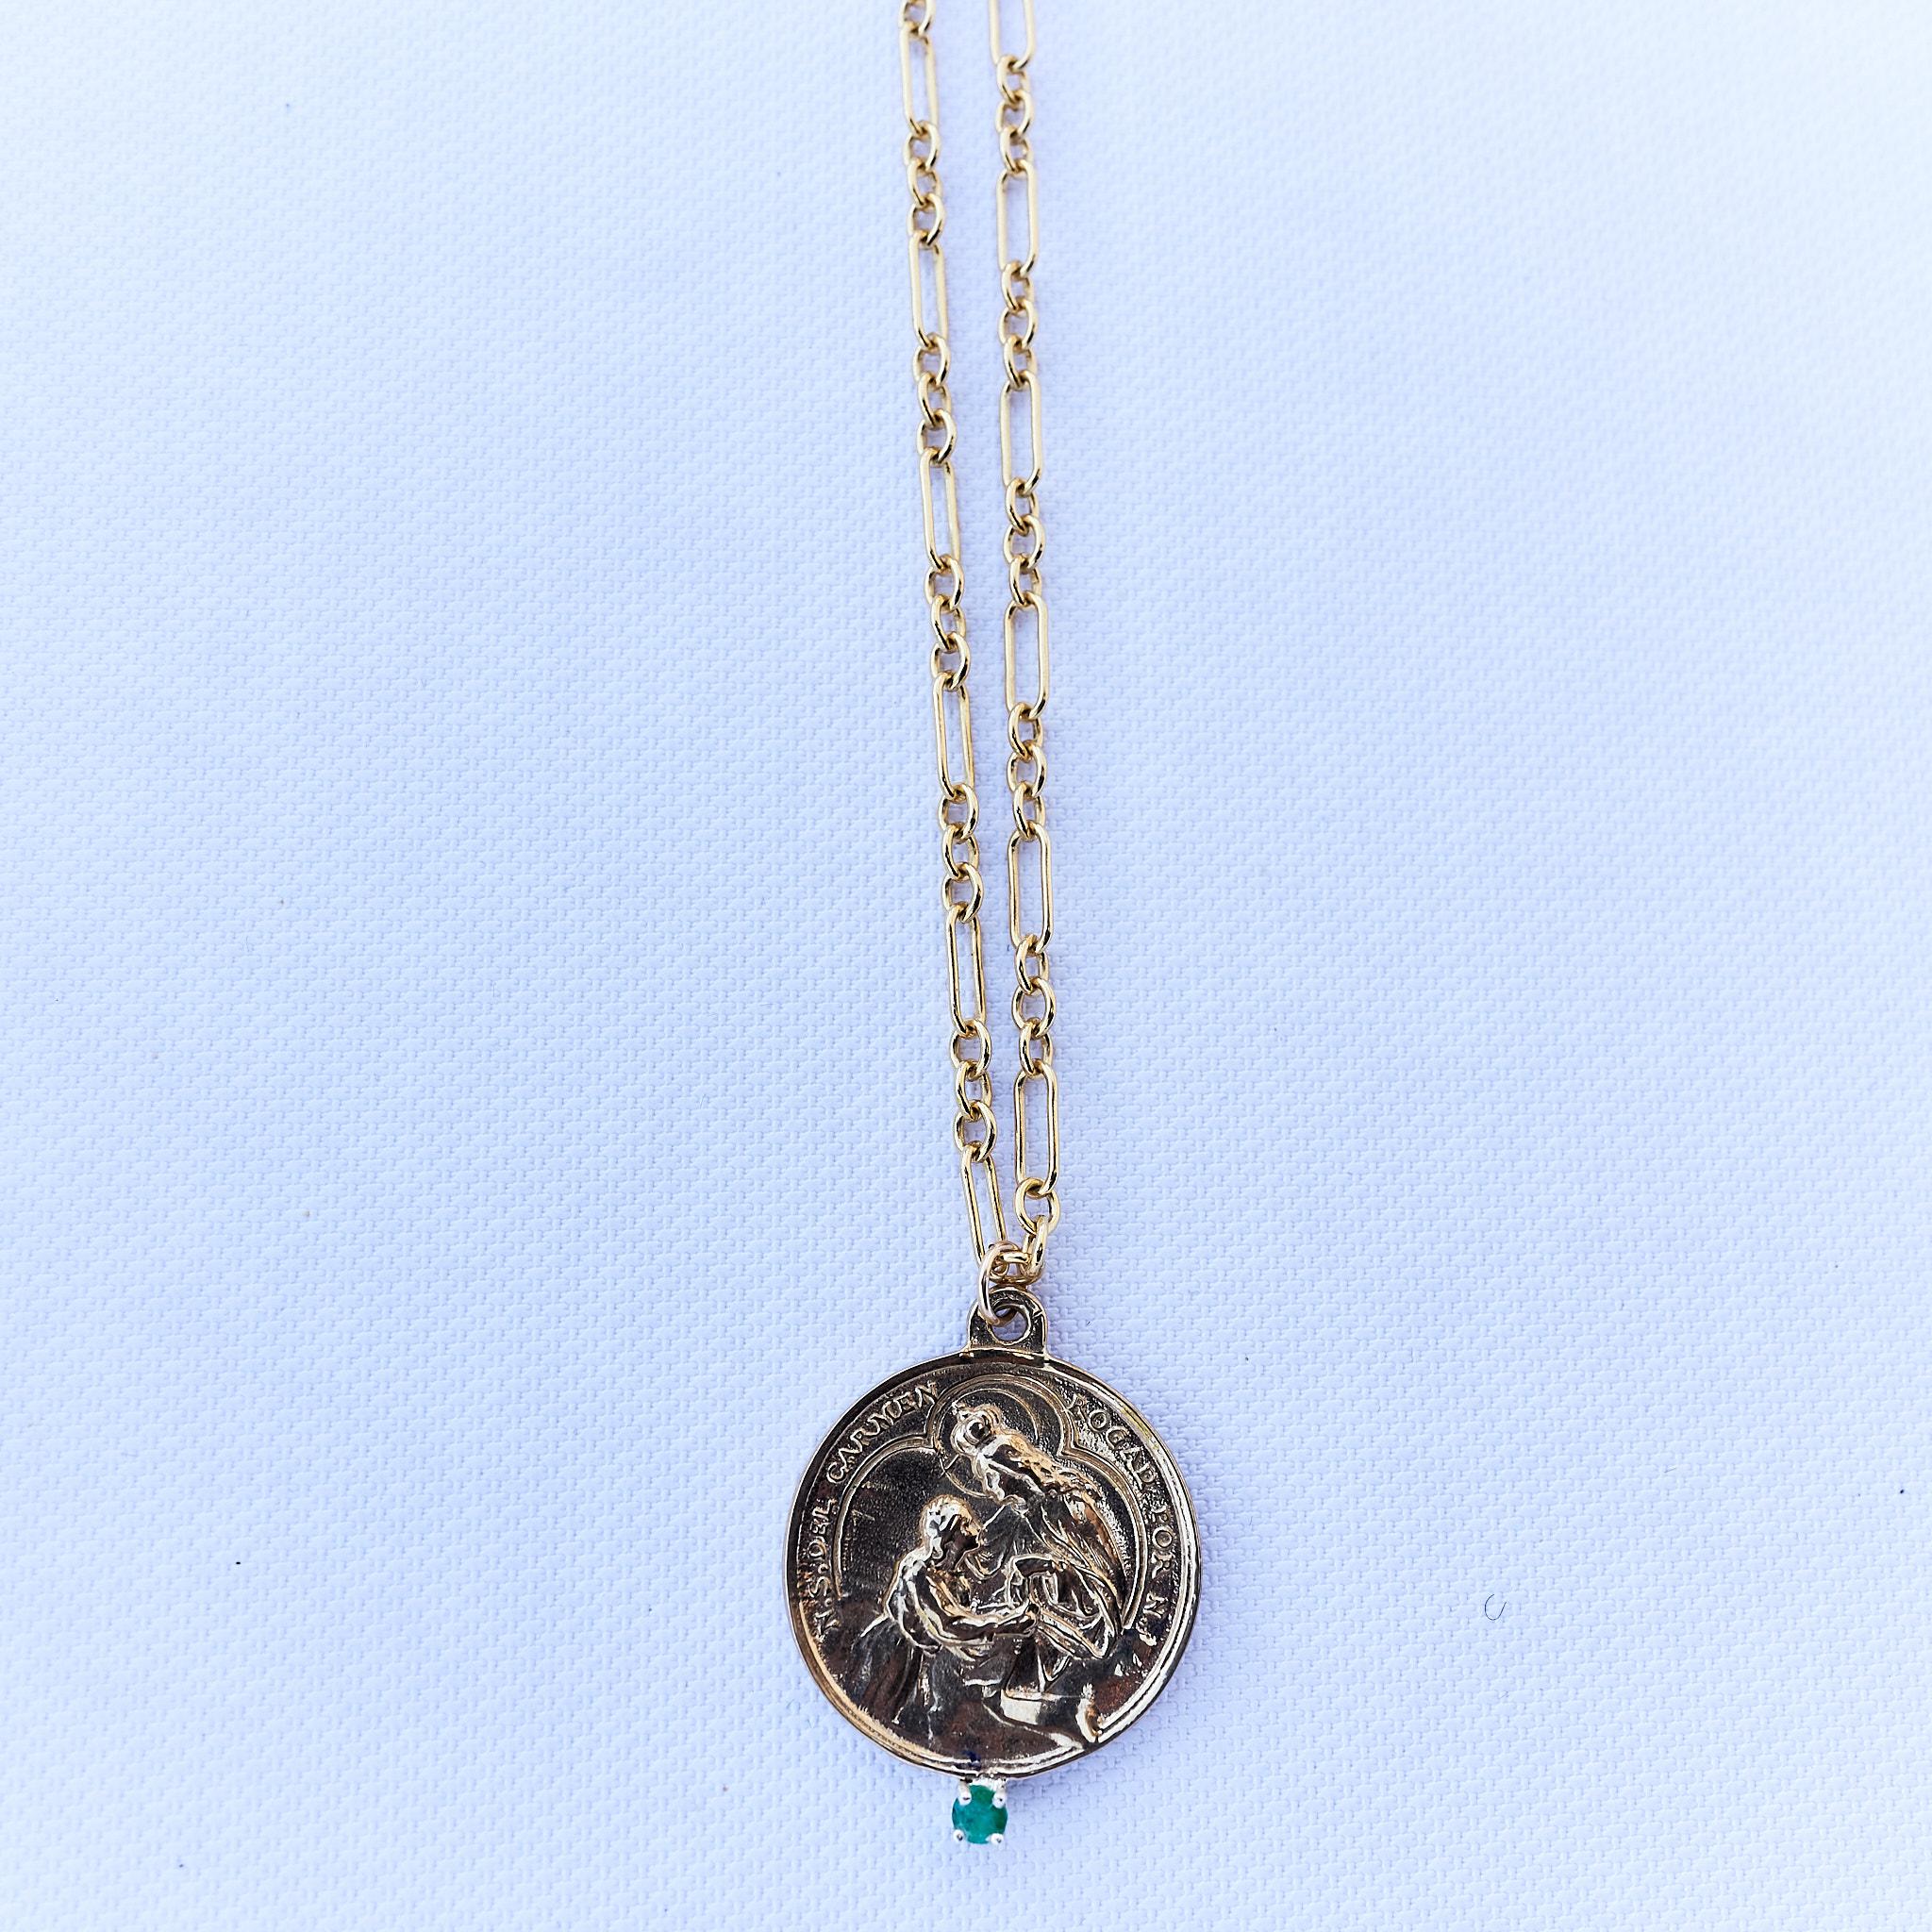 Emerald Medal Necklace Virgin Mary Chain J Dauphin In New Condition For Sale In Los Angeles, CA